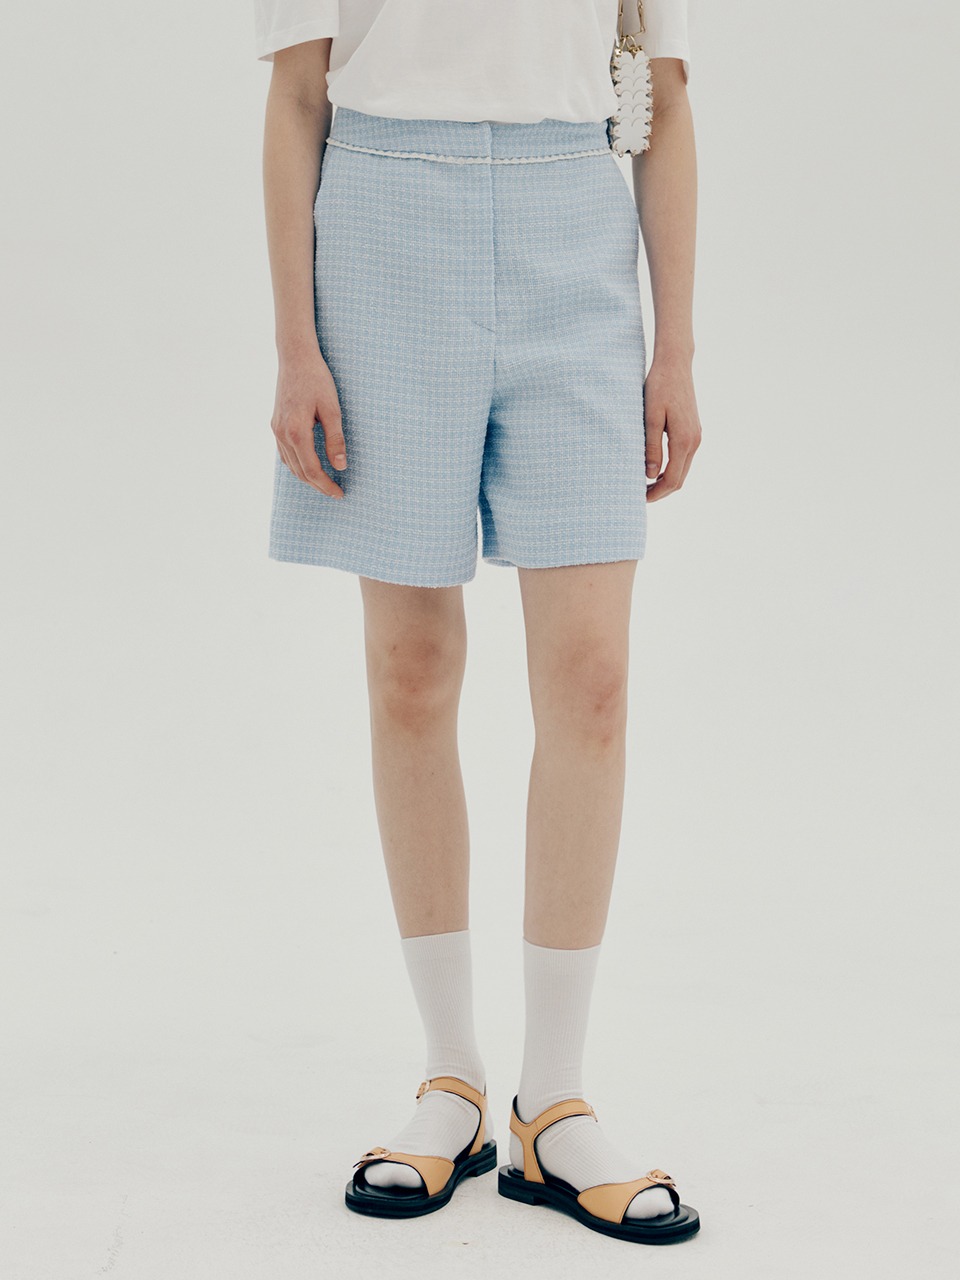 Tweed embroidery shorts - Light blue